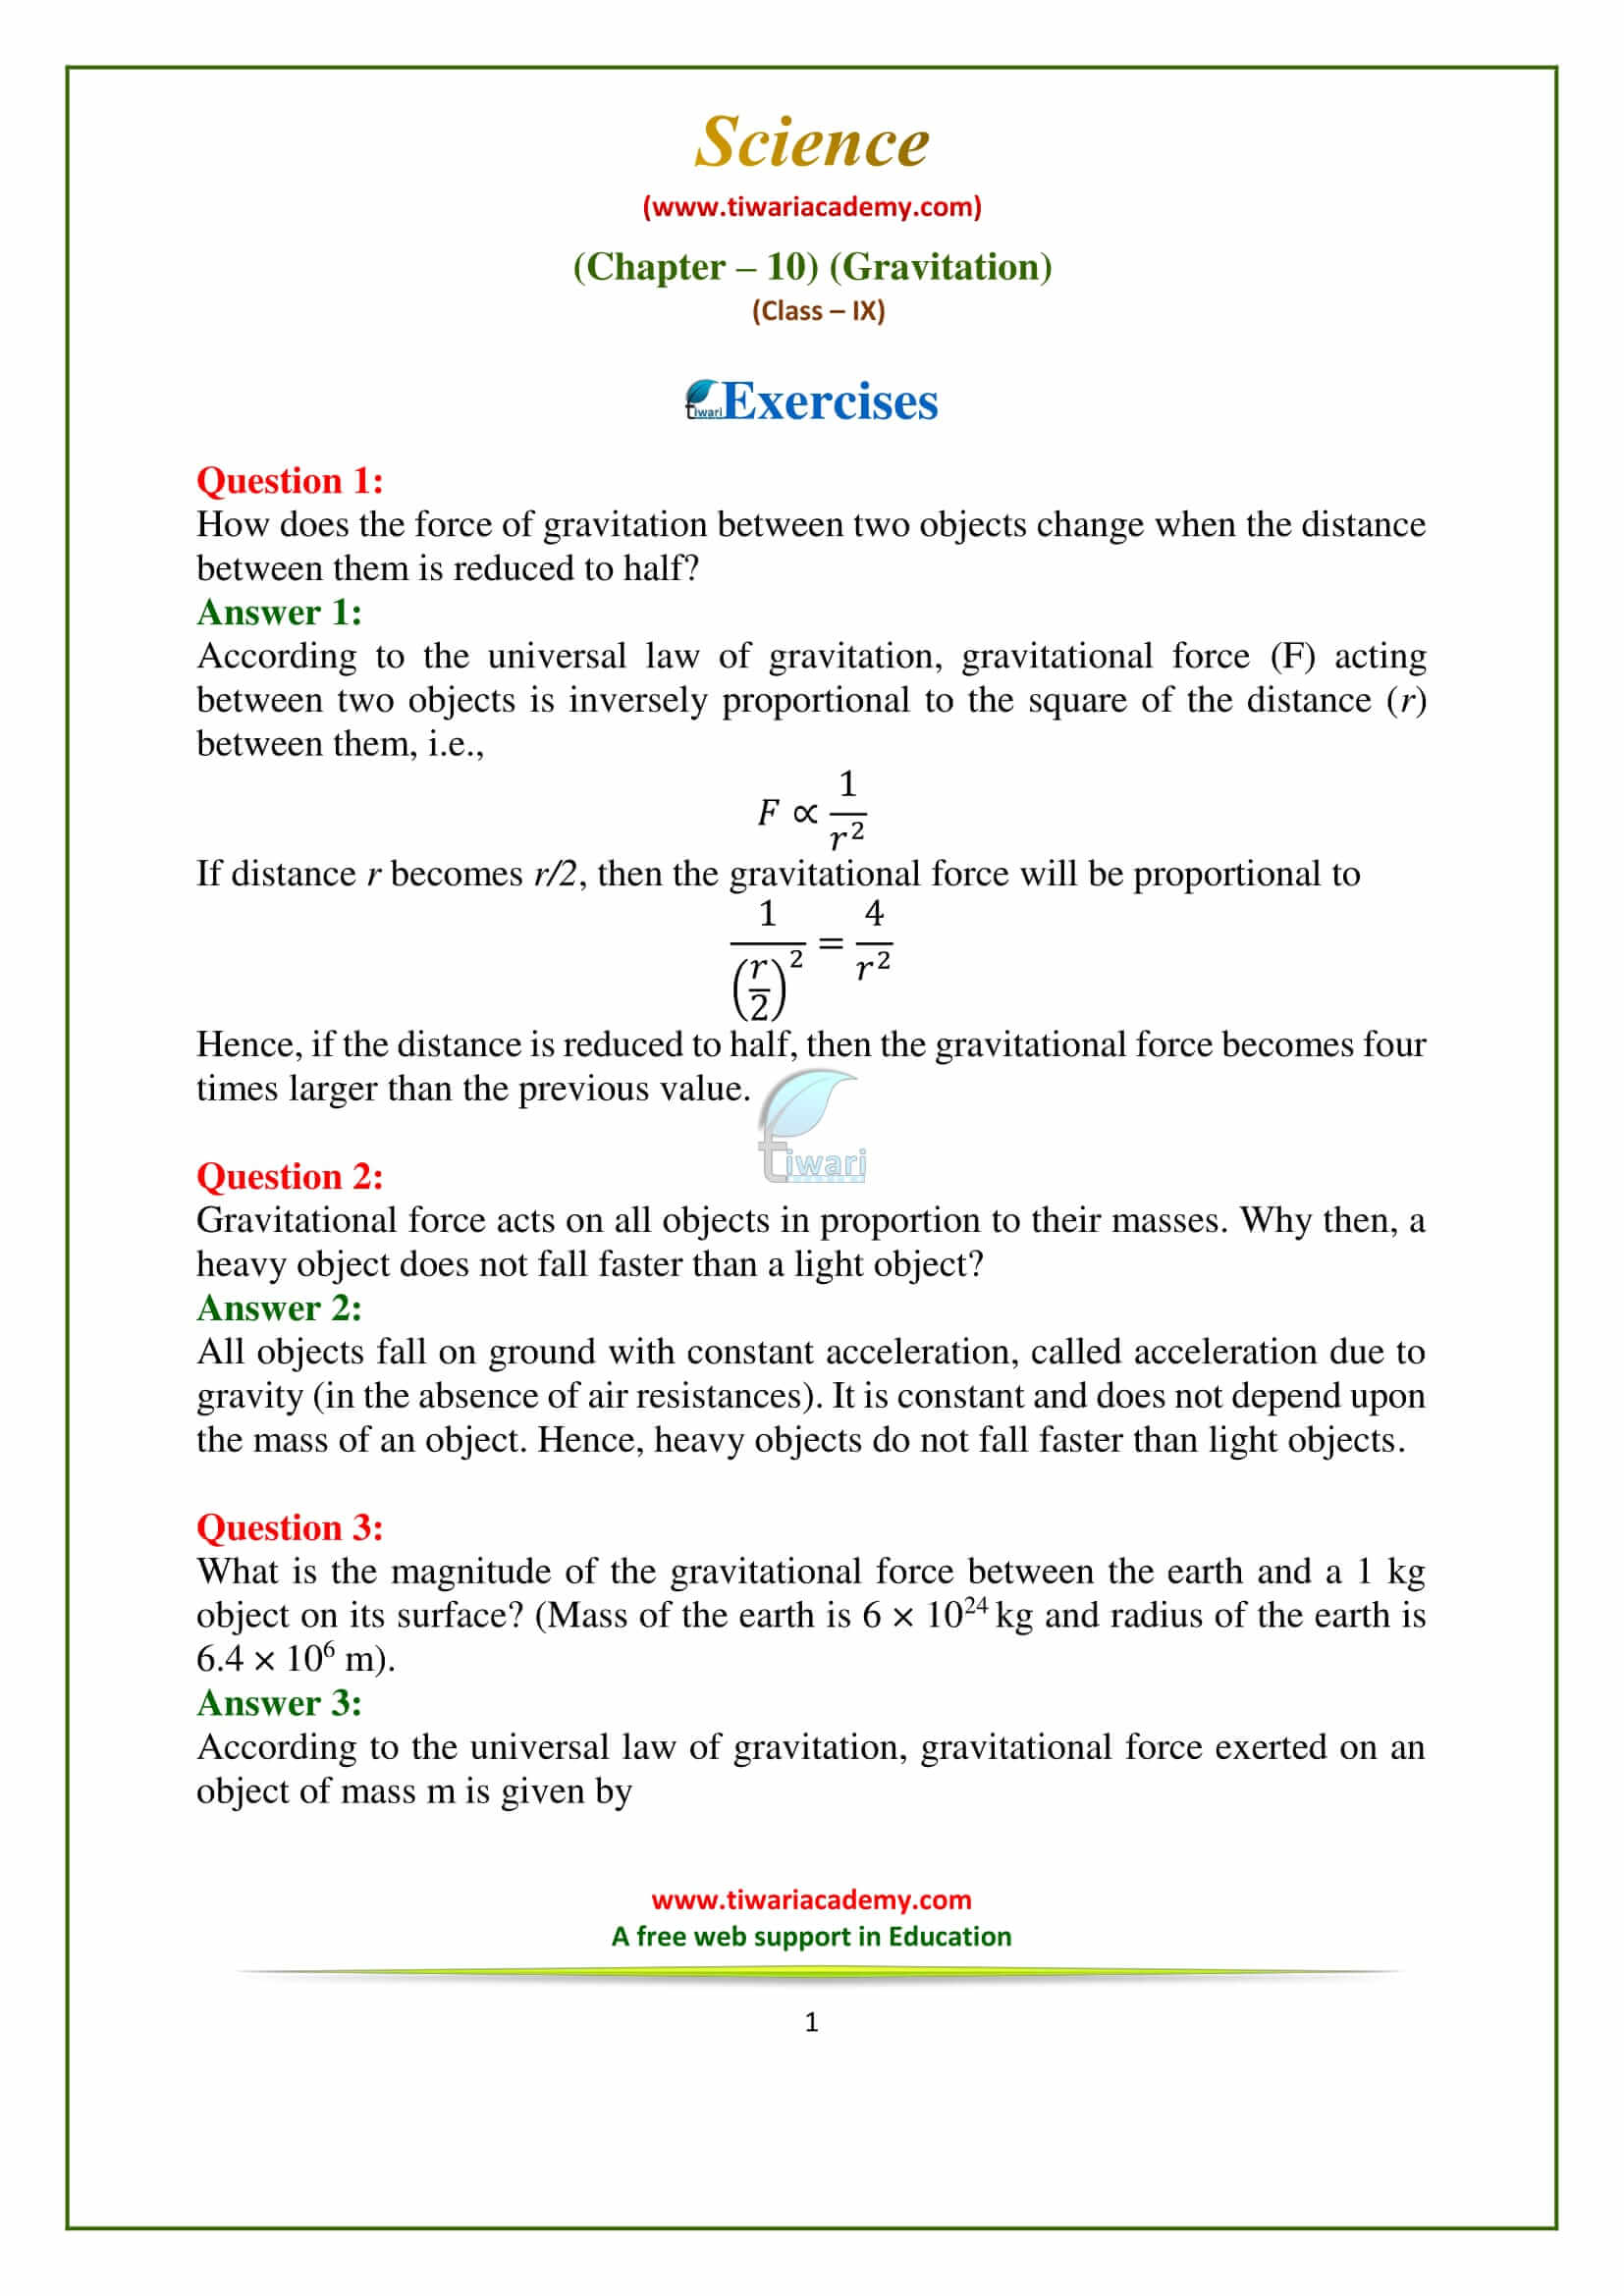 9 Science Chapter 10 Gravitation Exercises question answers